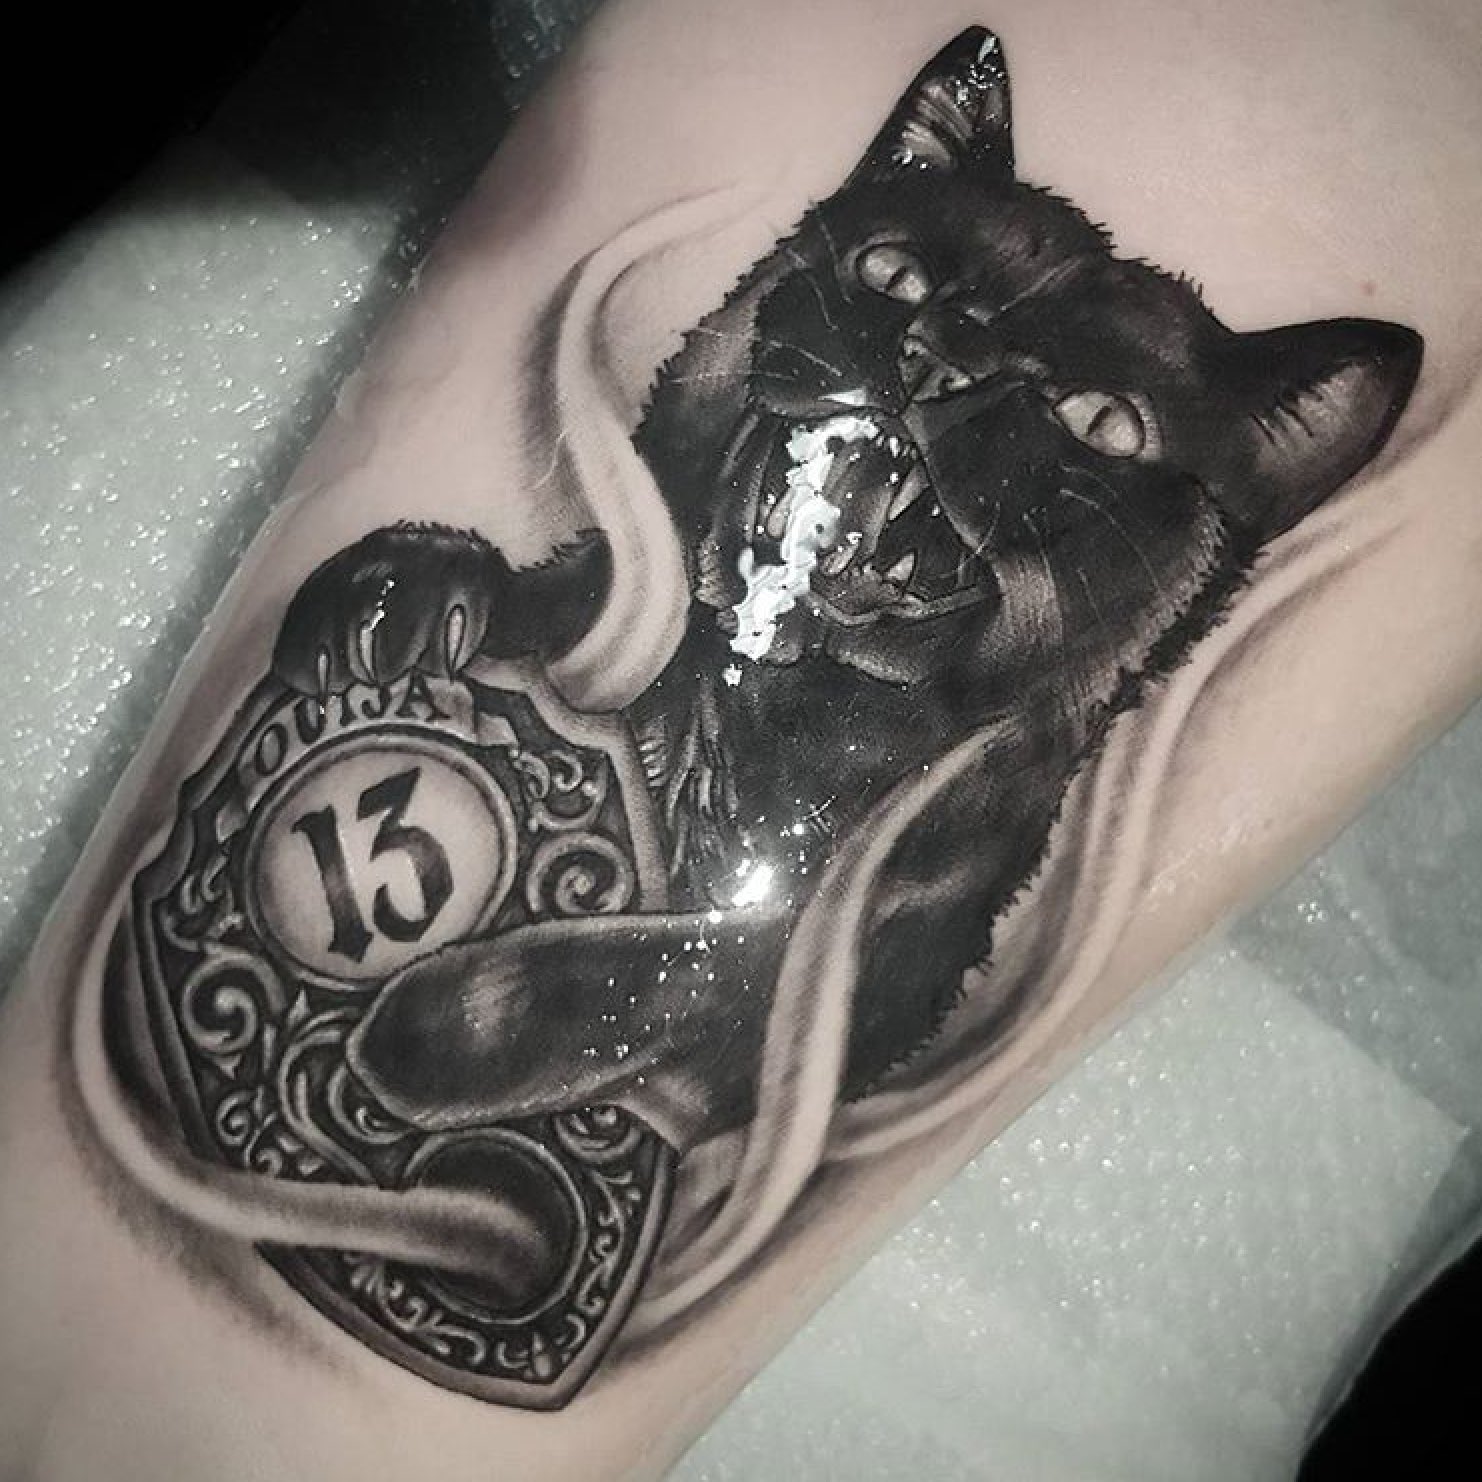 Lucky cat done by @a_e_craven on Zack. Come check out his flash as he has a  ton of designs here @tiptoptattoopdx | Instagram